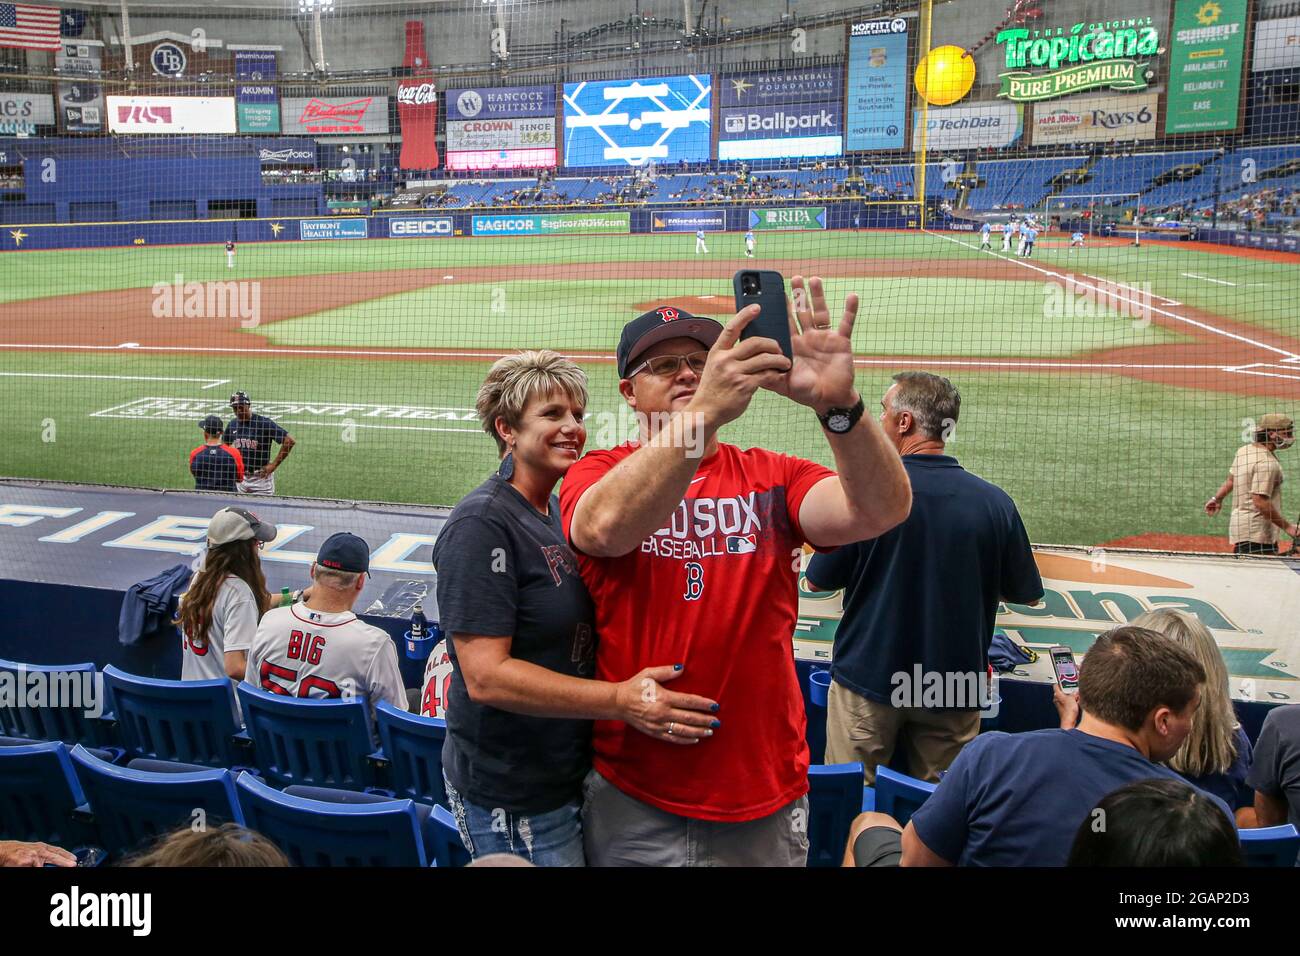 St. Petersburg, FL. USA; Happy Red Sox fans taking a selfie at the